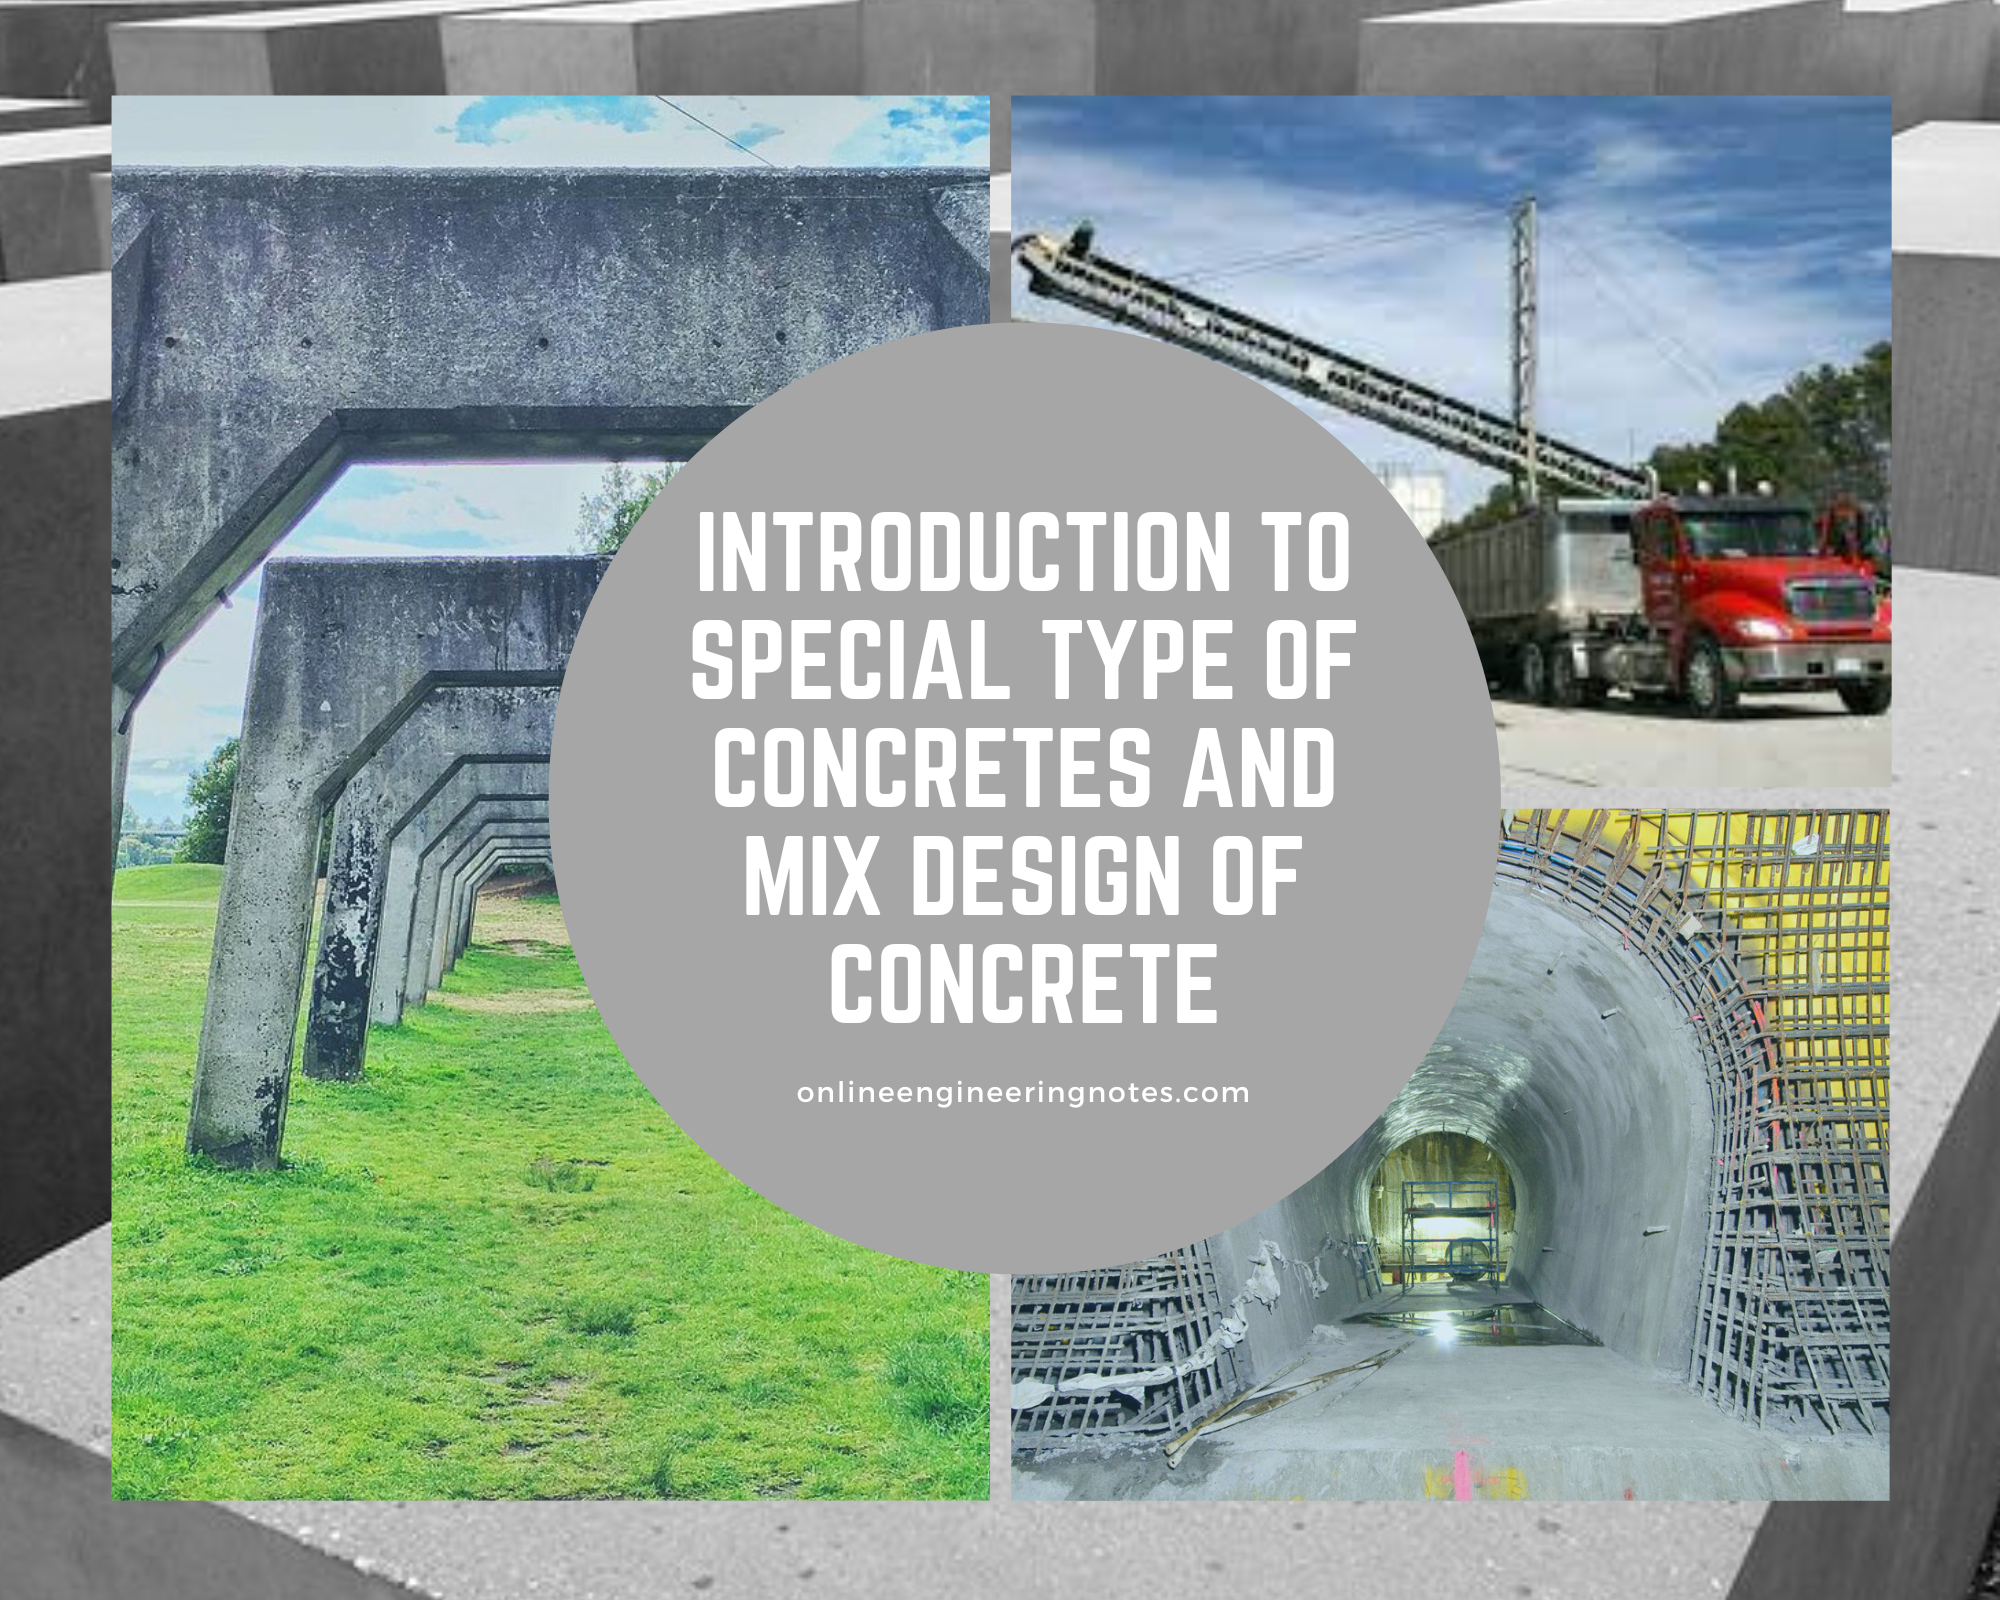 Introduction to Special Type of Concretes and Mix Design of Concrete